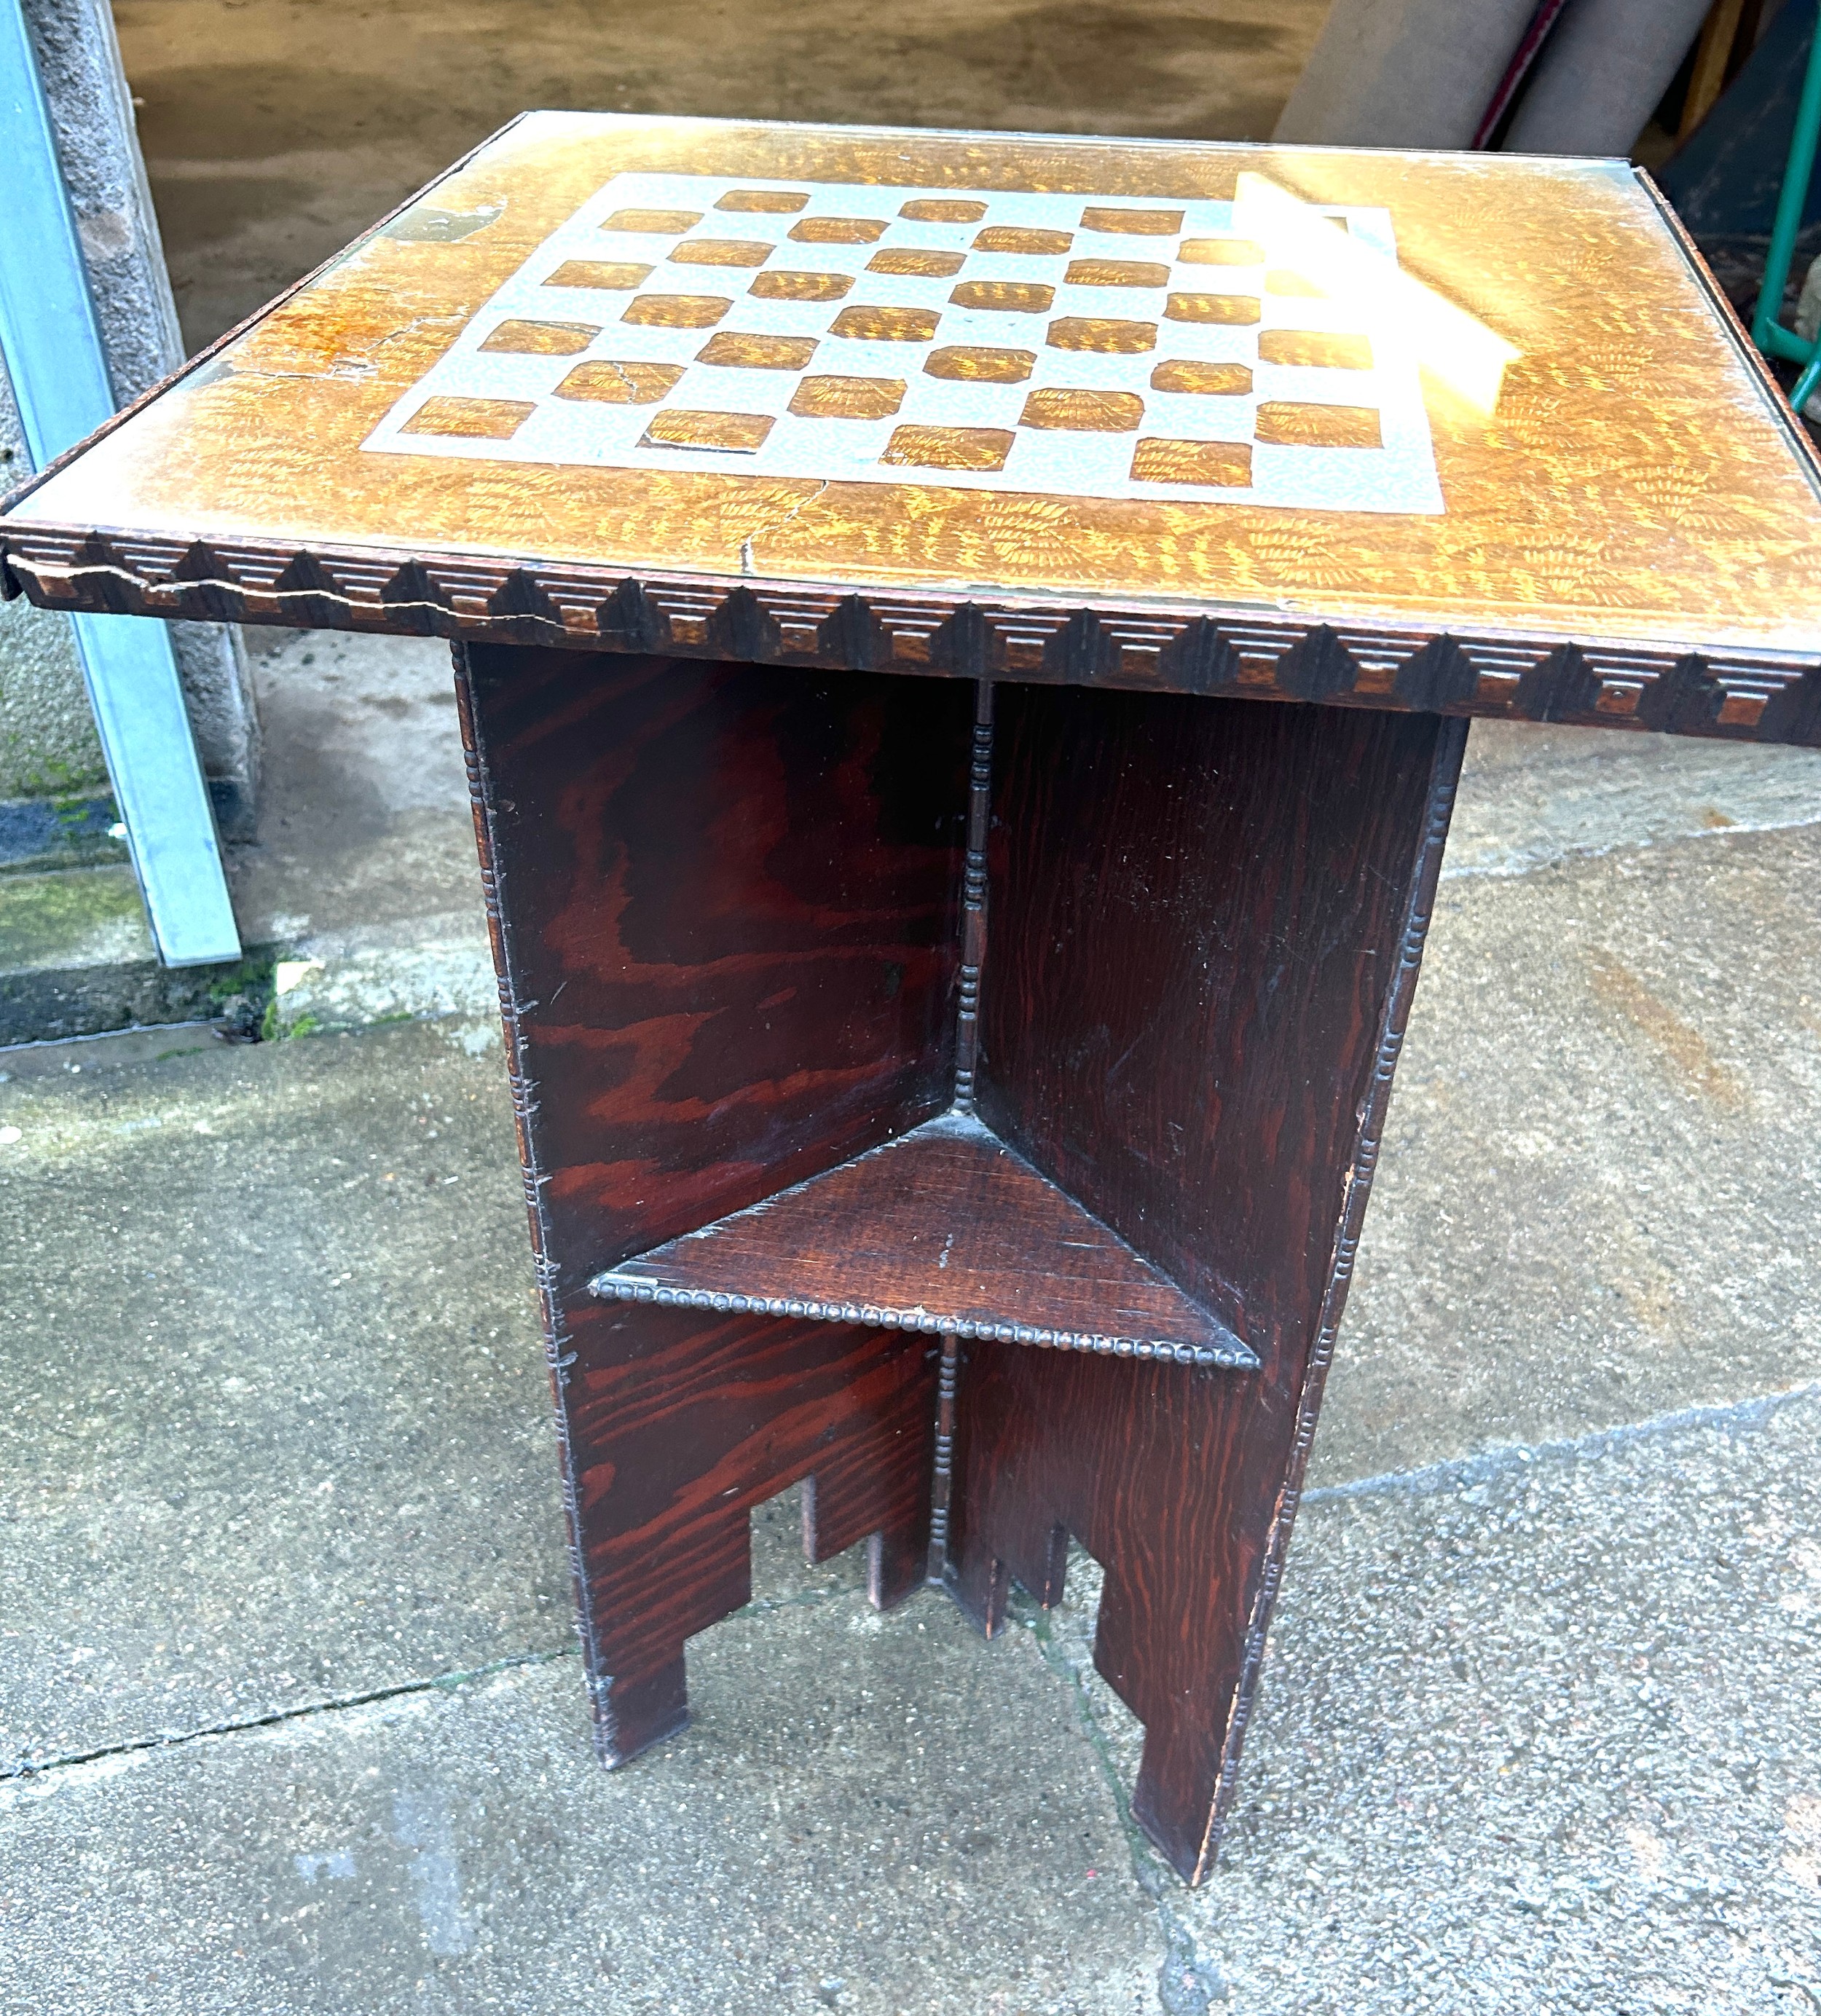 Small vintage carved games table measures approximately 29 inches tall 20 inches square - Image 3 of 3